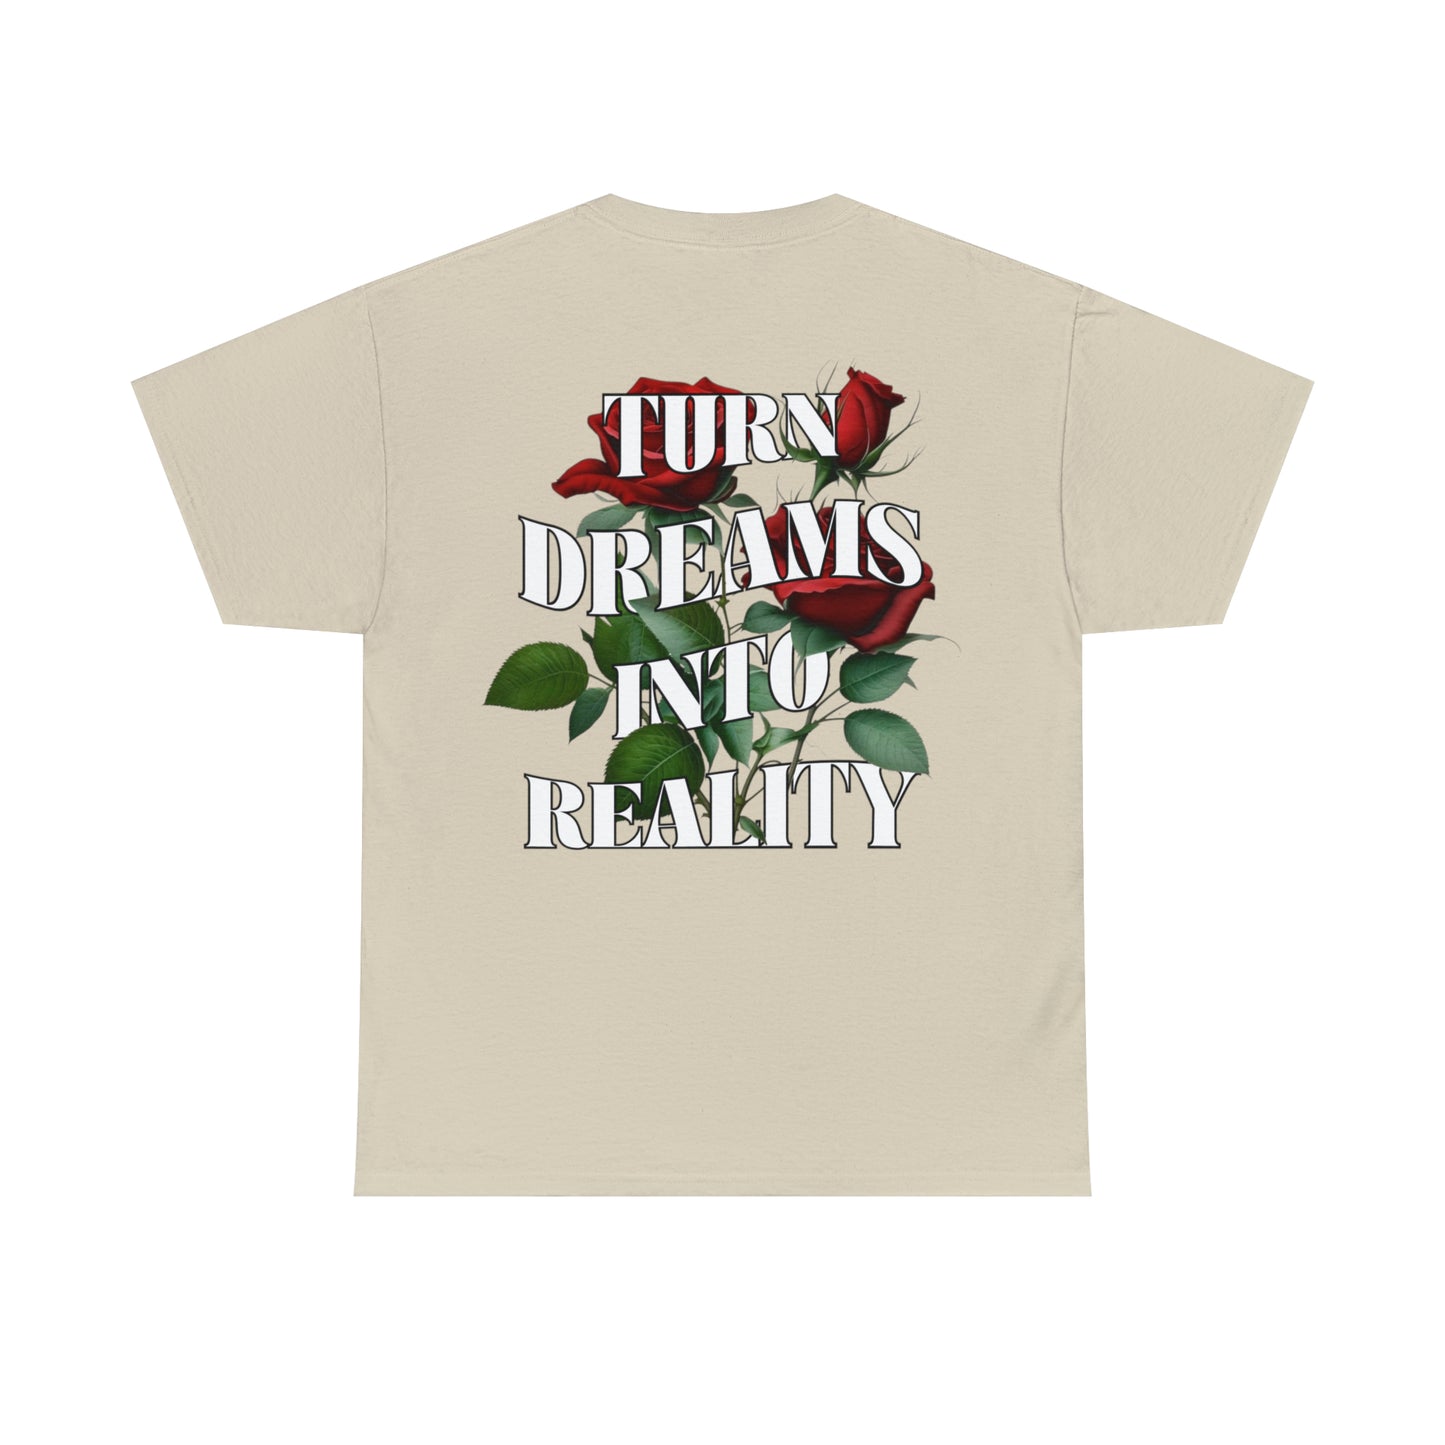 Beige graphic tee with "Turn Dreams Into Reality" Quote with red roses in between the lettering